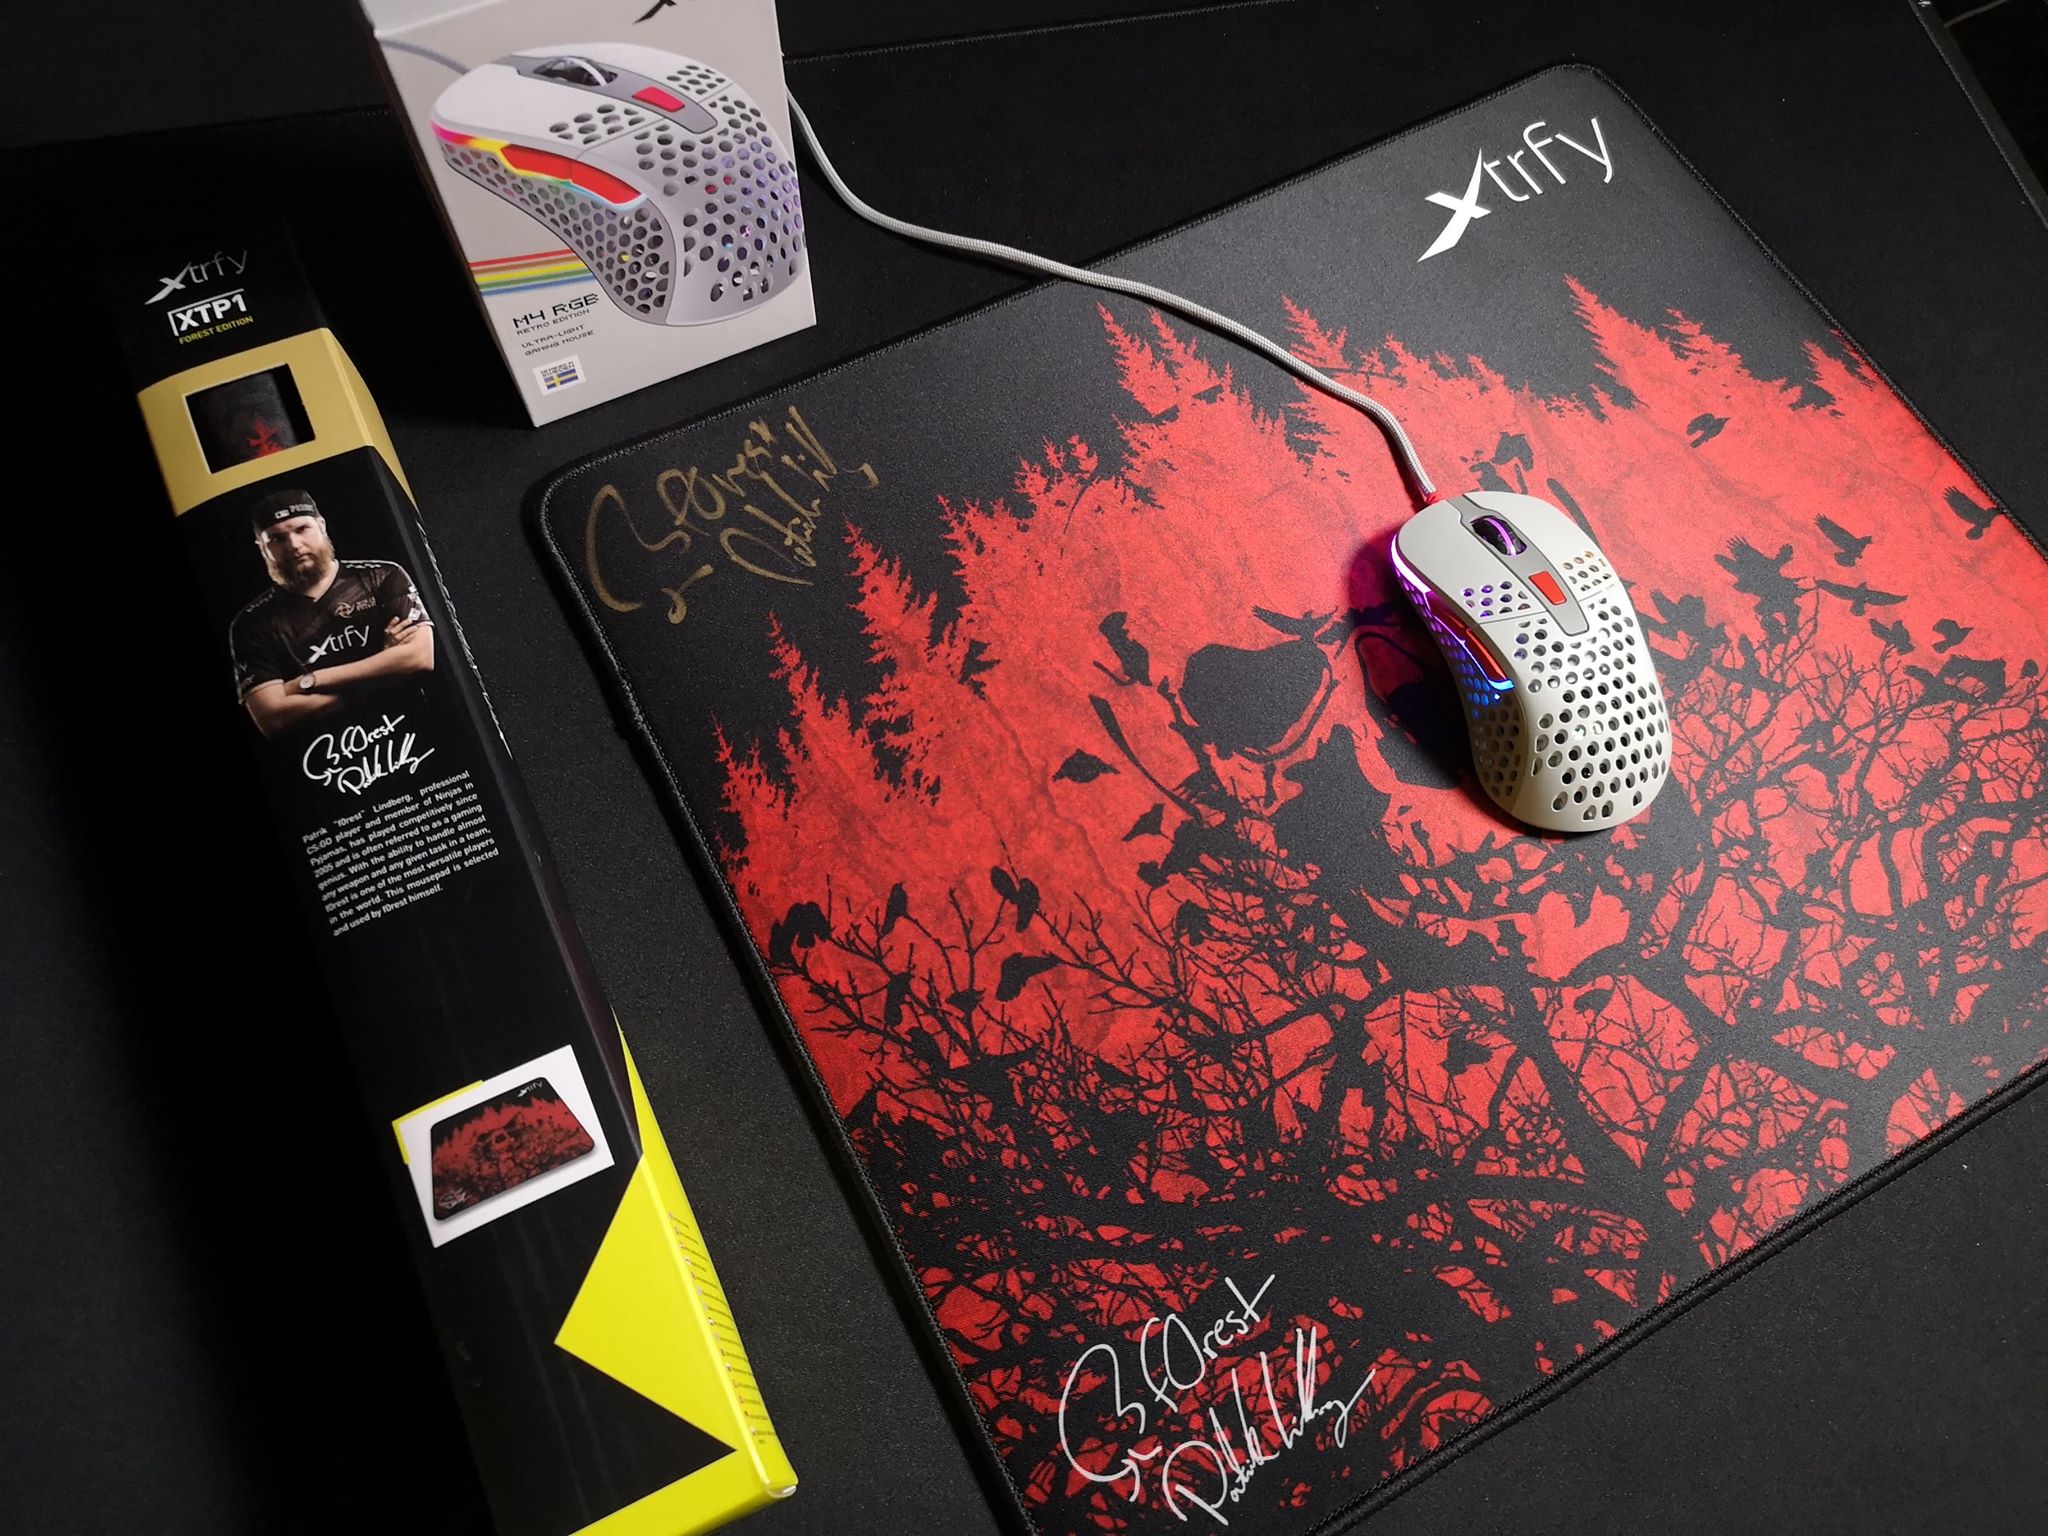 Xtrfy Reply To This Tweet For Your Chance To Win This Signed Xtp1 F0rest Mousepad M4 Retro Edition Mouse Then Hit Retweet And Cross Your Fingers Xtrfy M4 Gaming